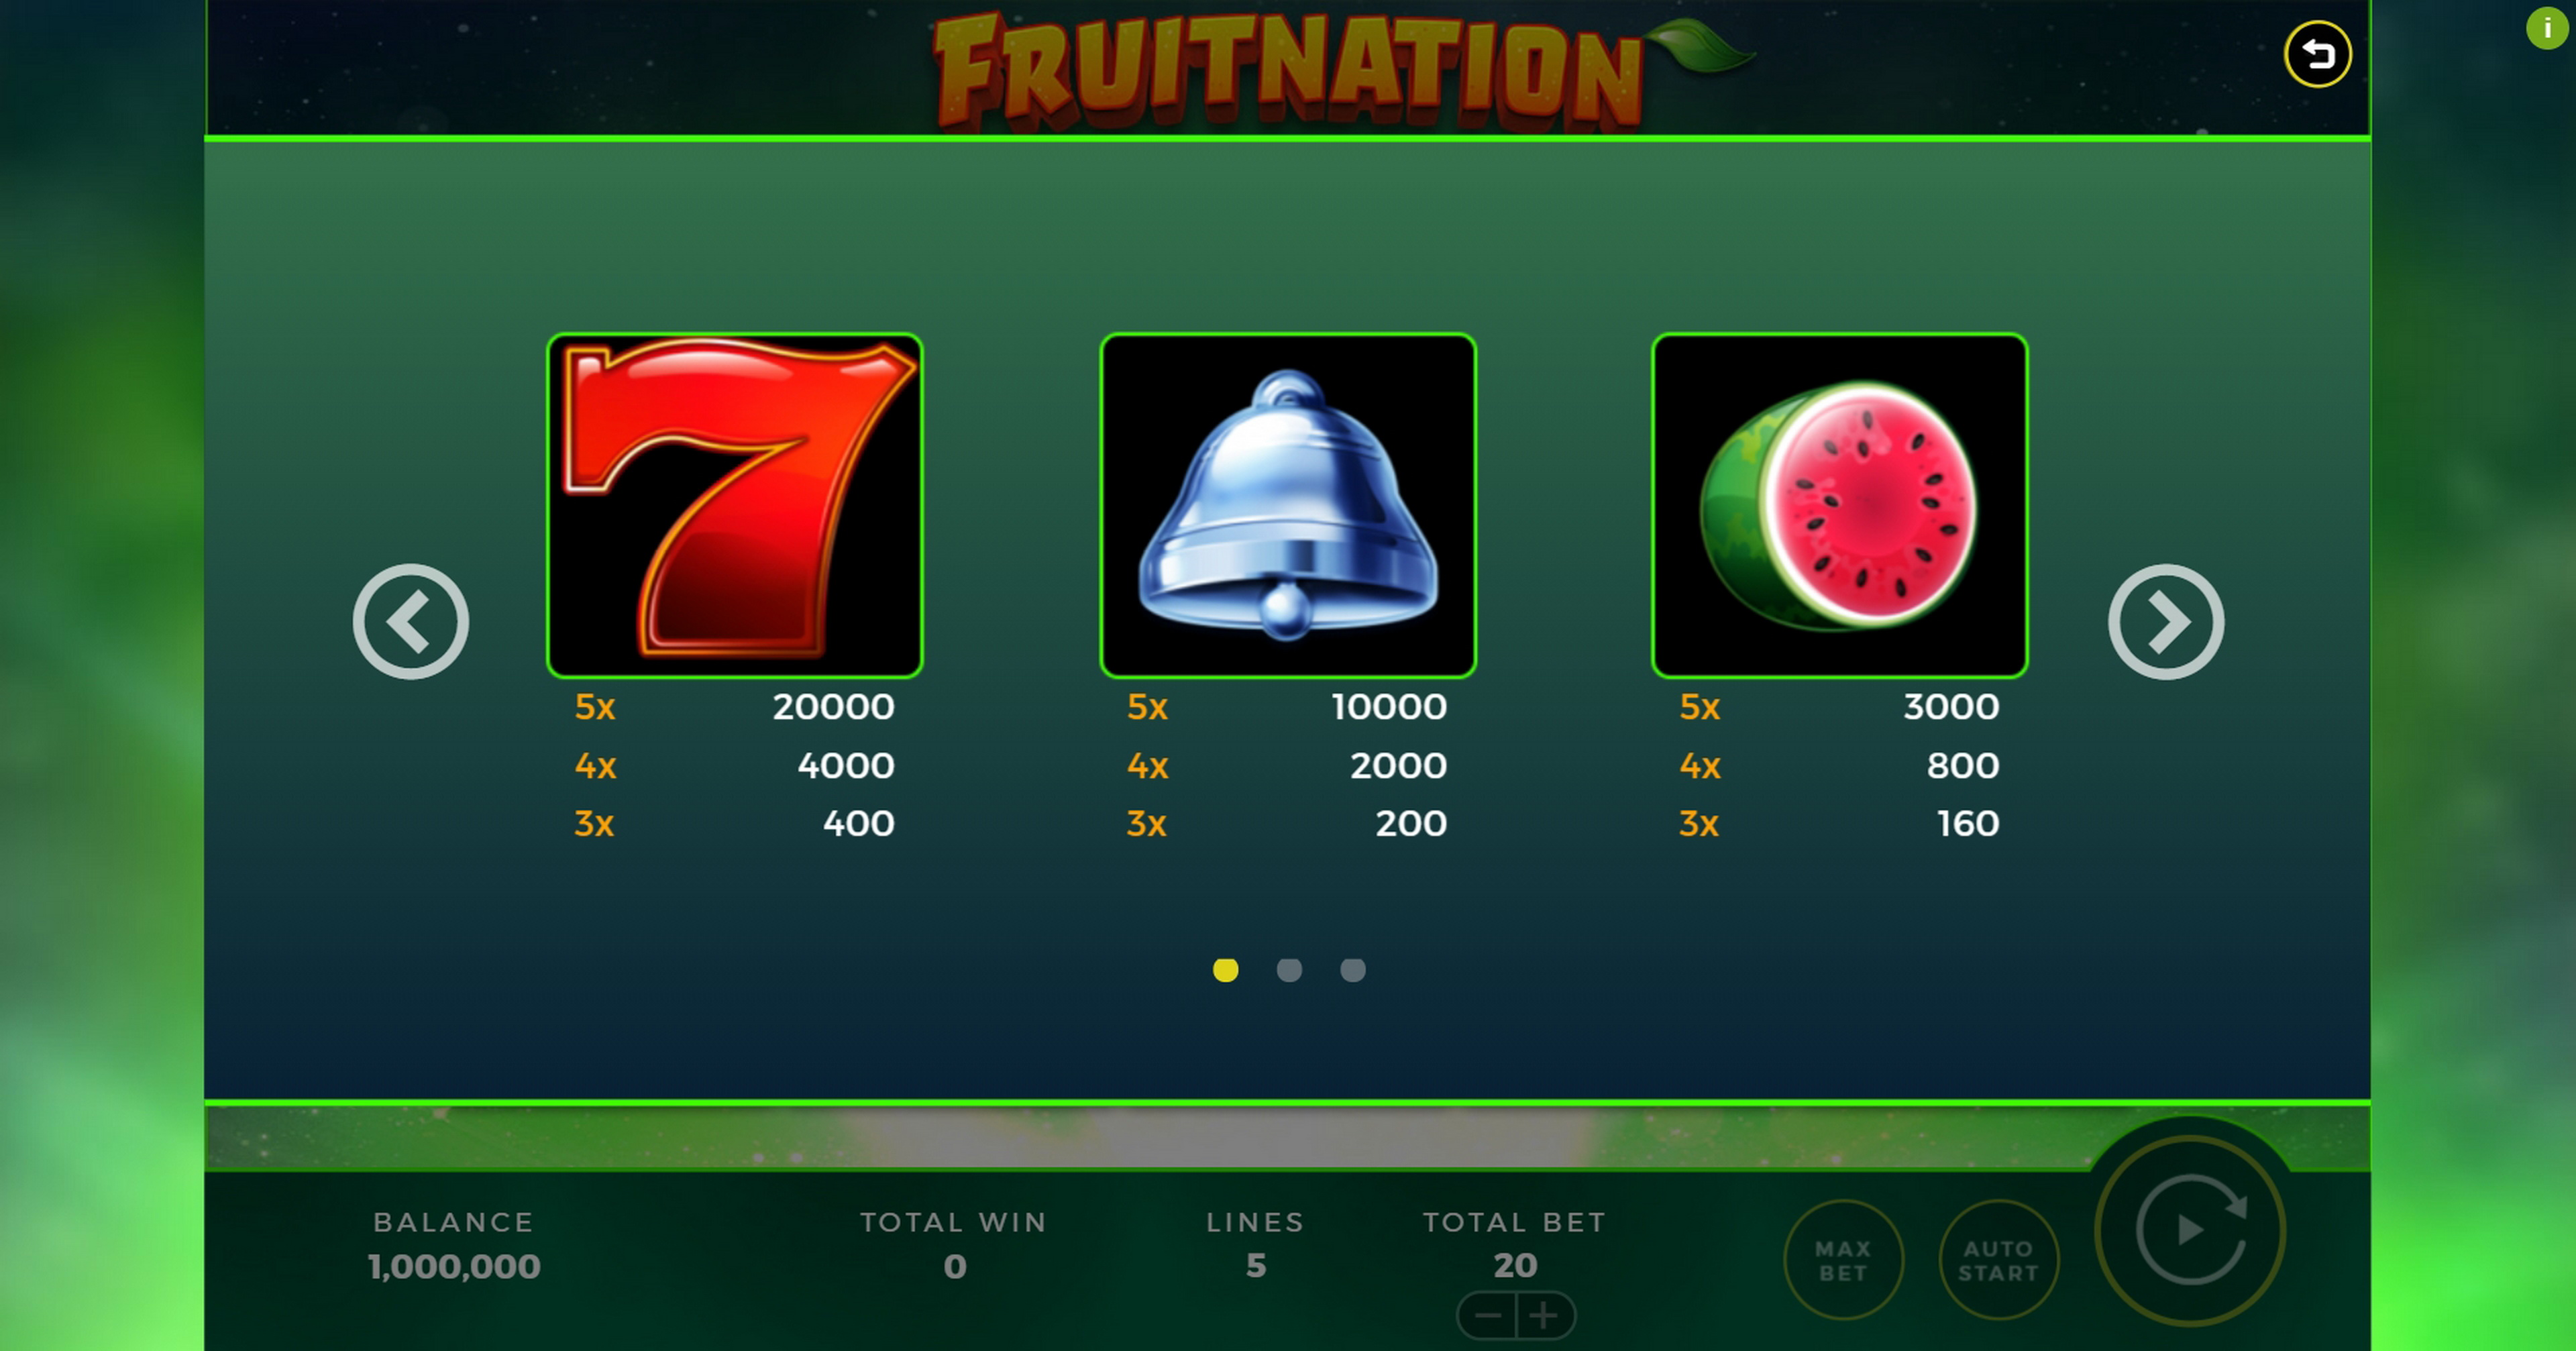 Info of Fruitnation Slot Game by Bally Technologies